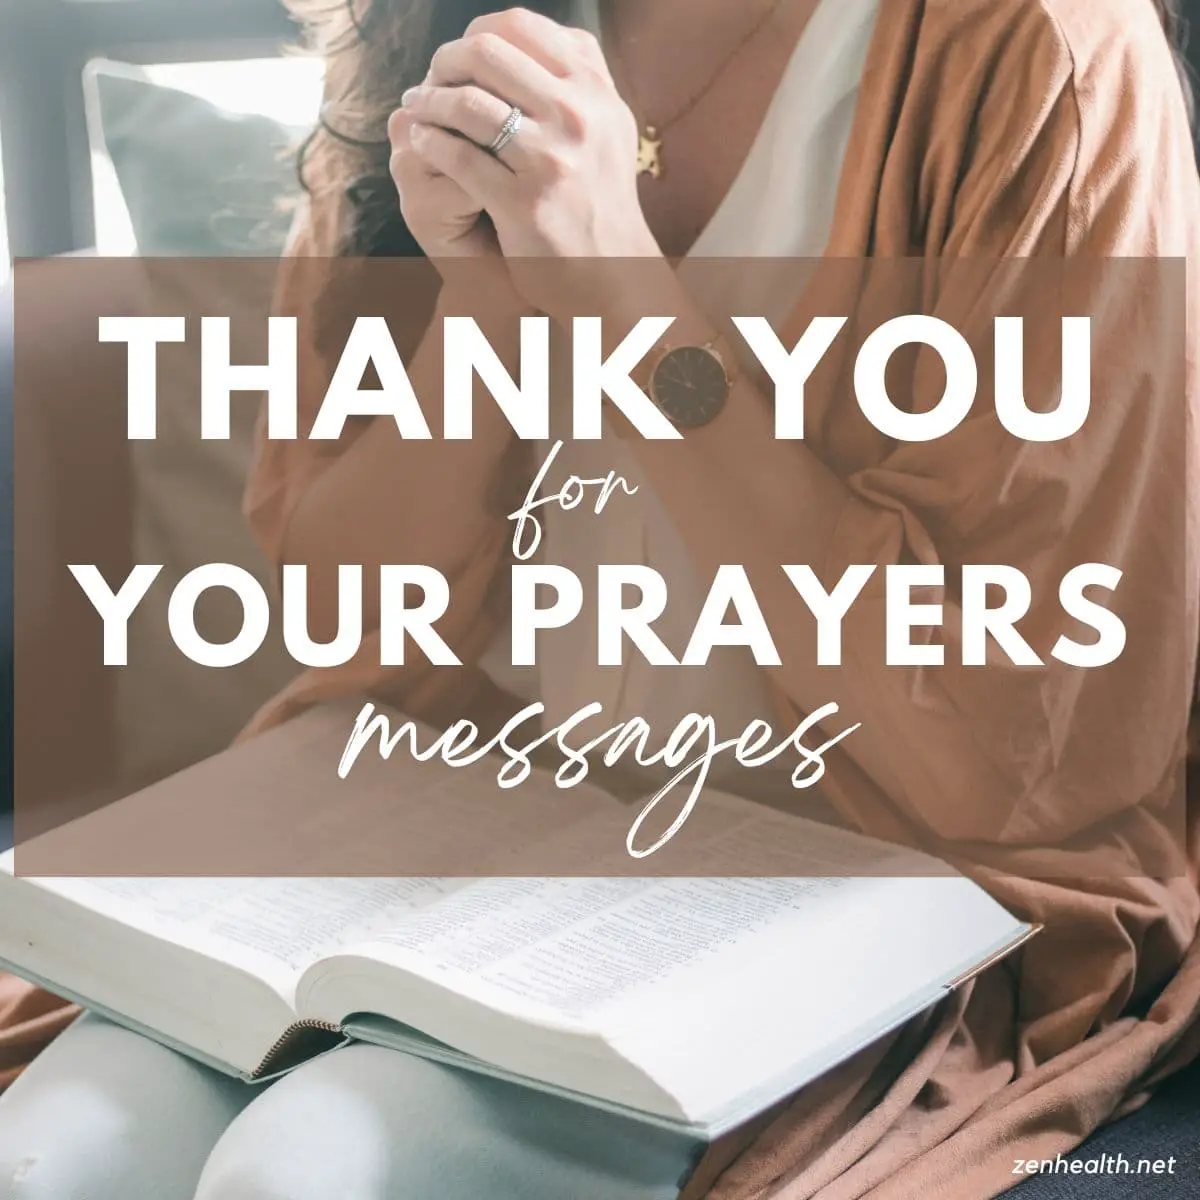 thank you for your prayers messages text overlay on a woman sitting and praying with a religious book on her lap